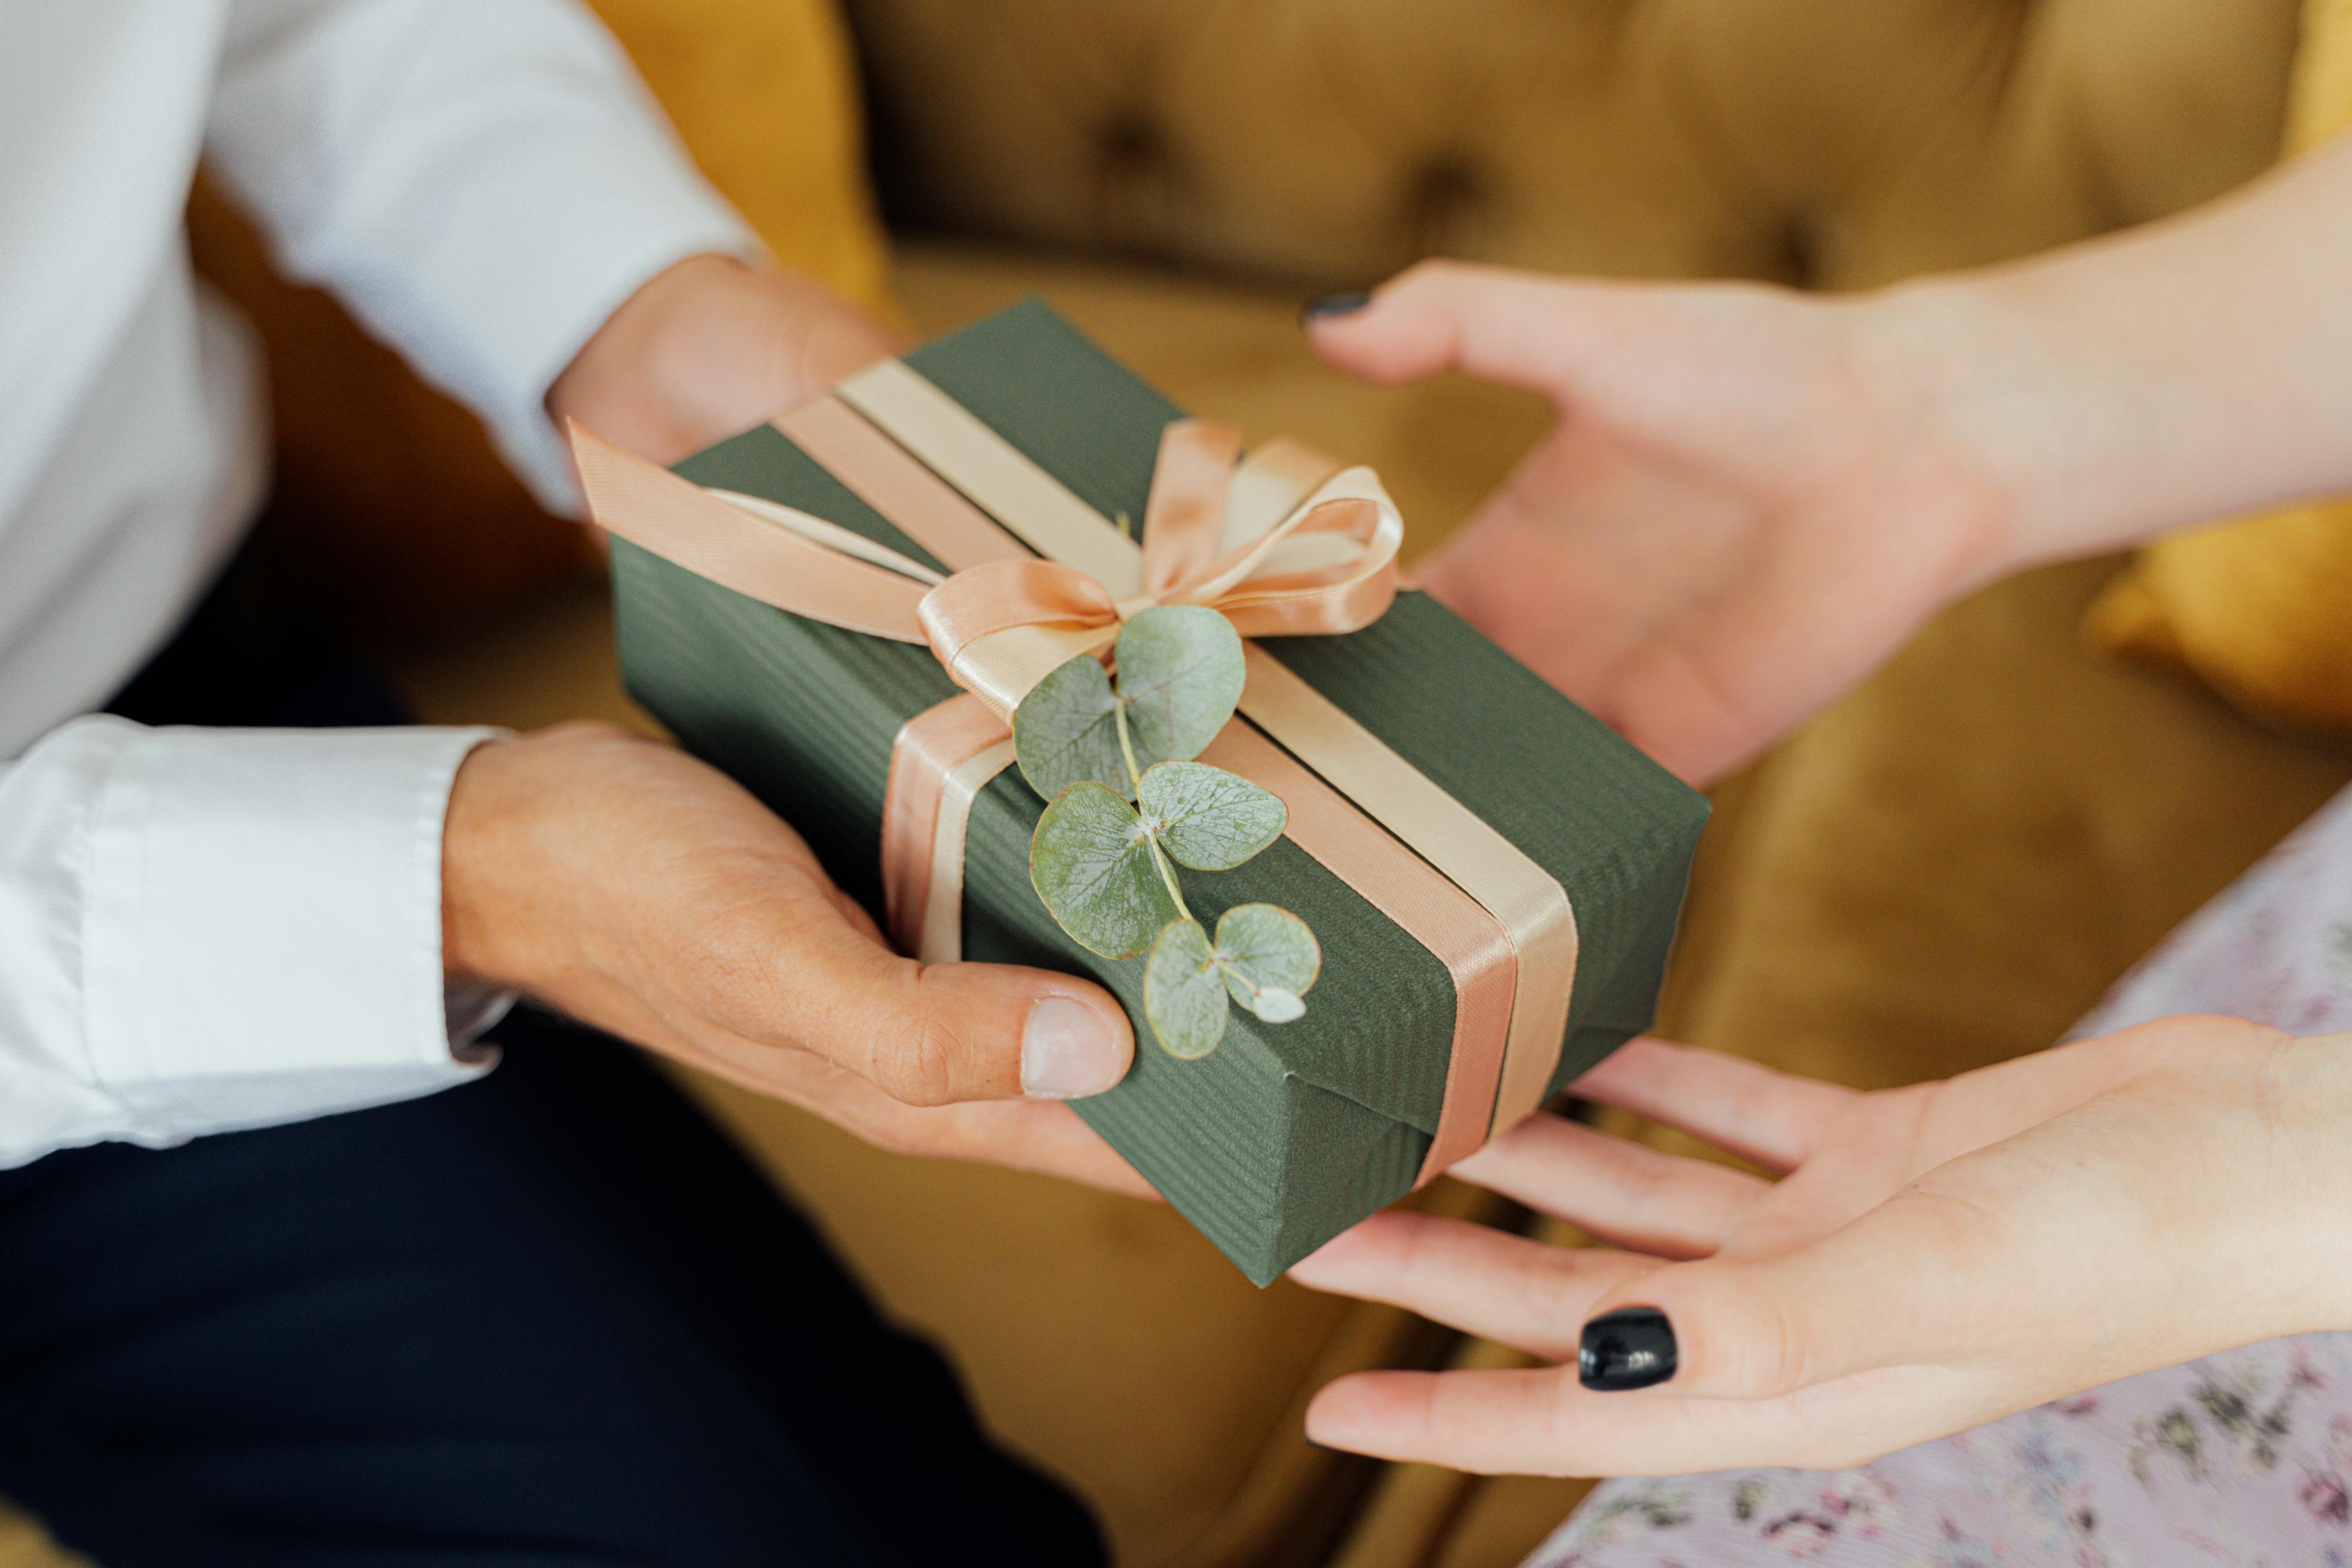 The Psychology of Gift Giving: Why We Give and How It Makes Us Feel